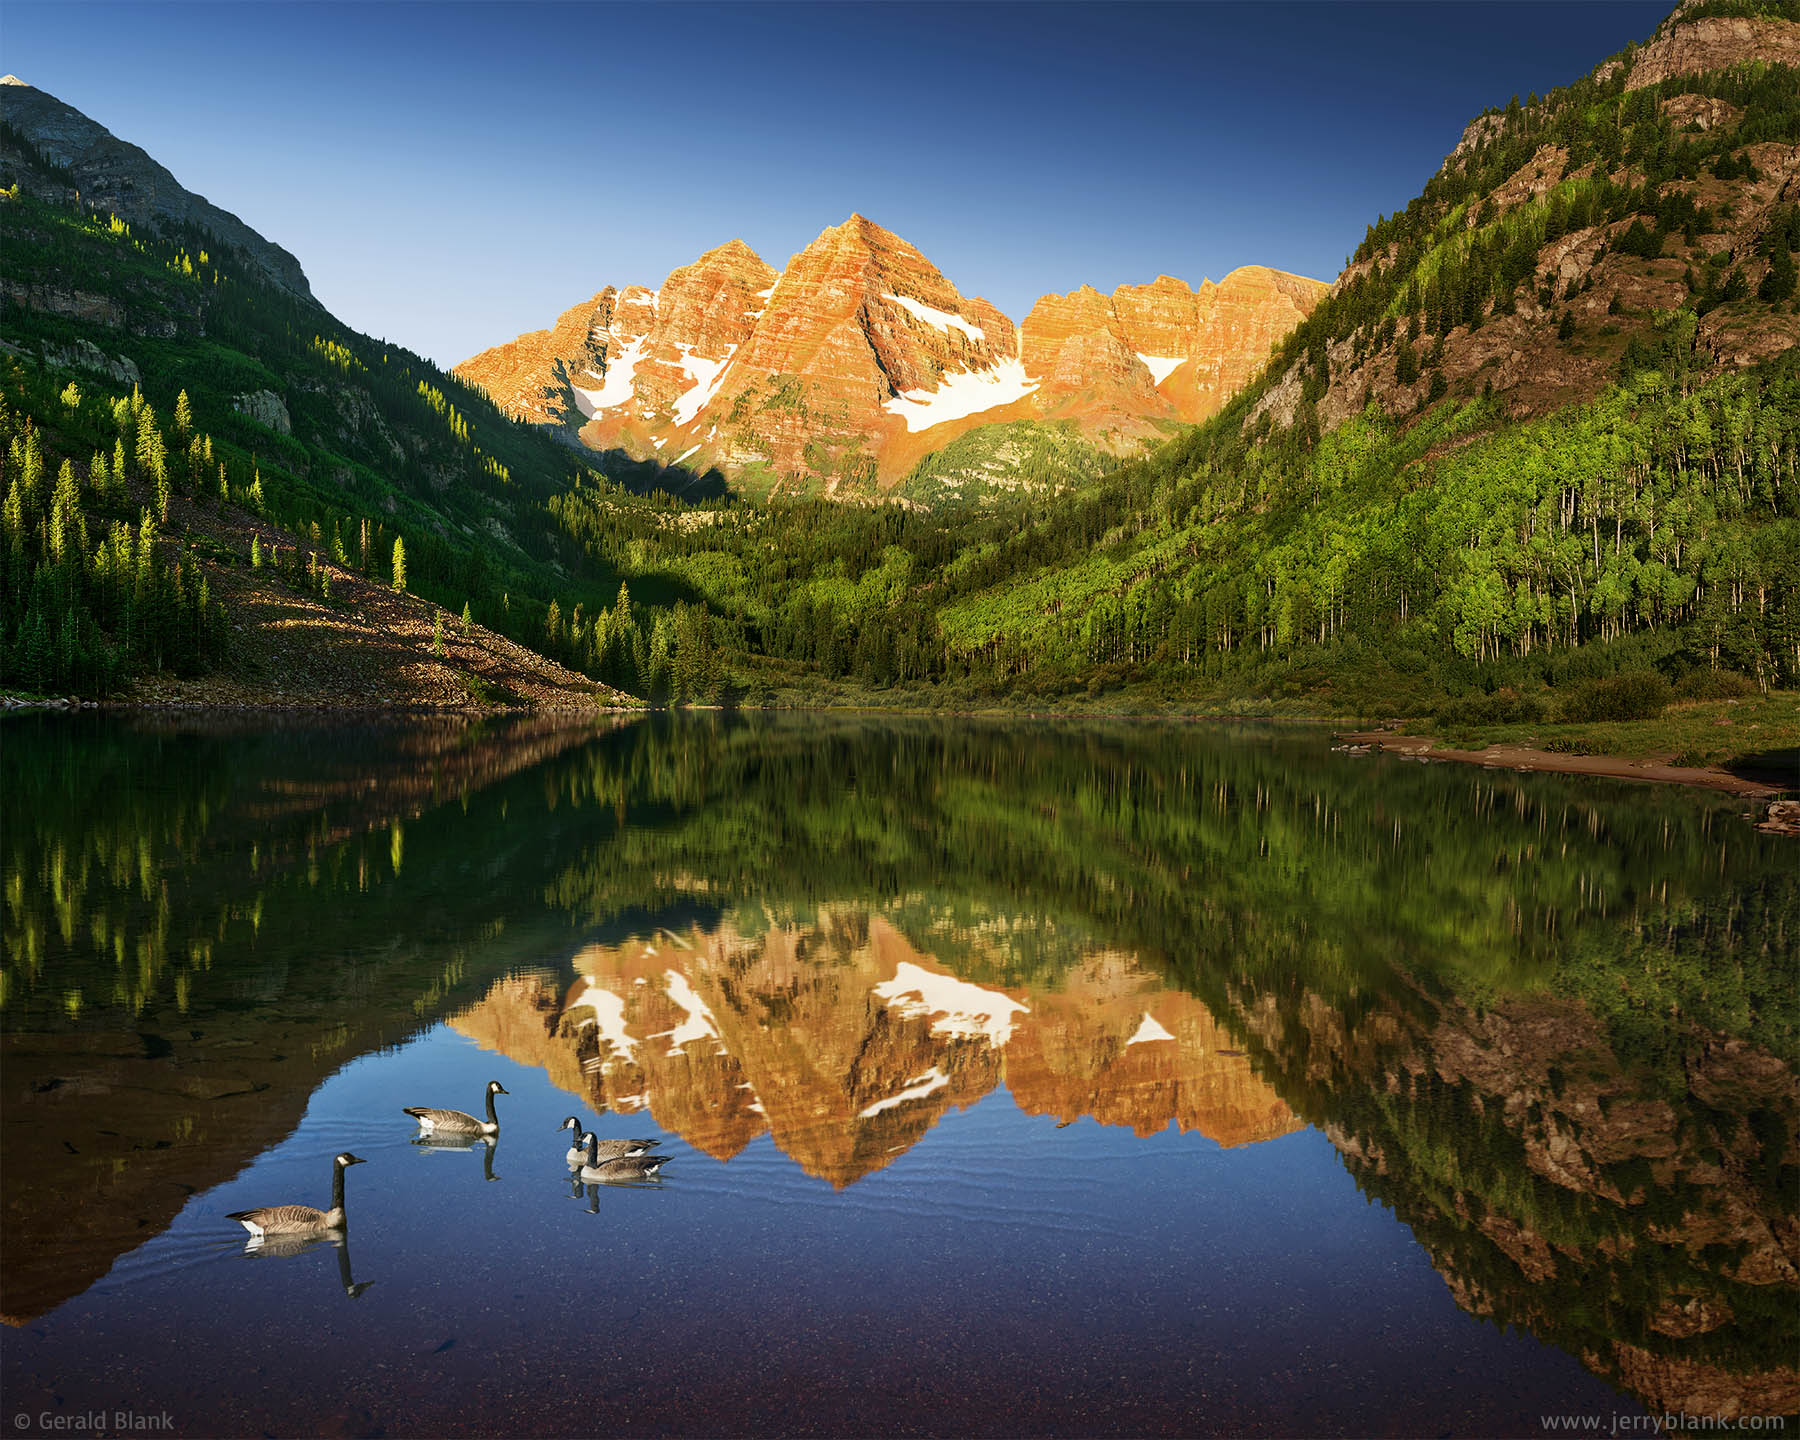 #23409 - Canada geese visit Maroon Lake, Colorado just after daybreak, as the Maroon Bells glow in the morning light - photo by Jerry Blank